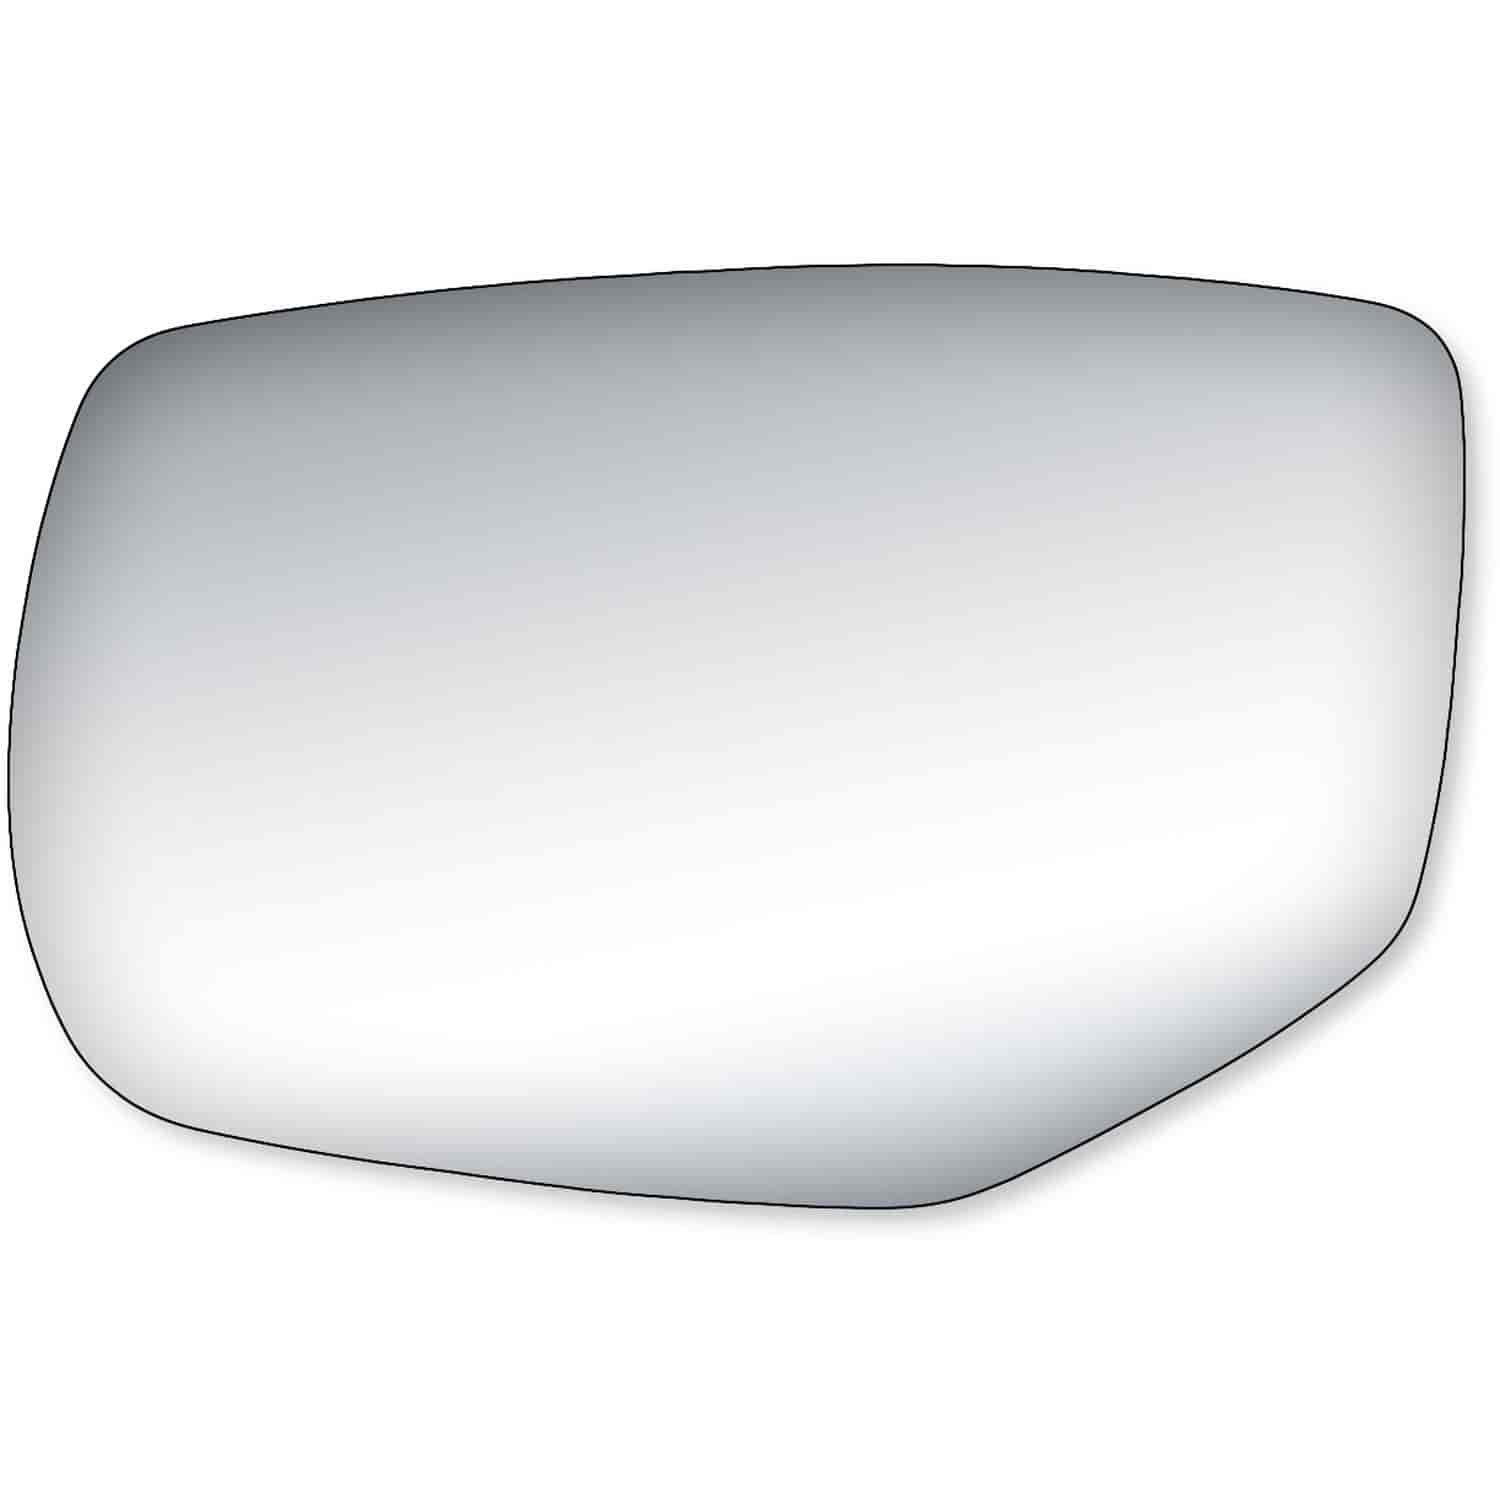 Replacement Glass for 13-14 Accord w/turn signal & blind spot lens the glass measures 4 13/16 tall b